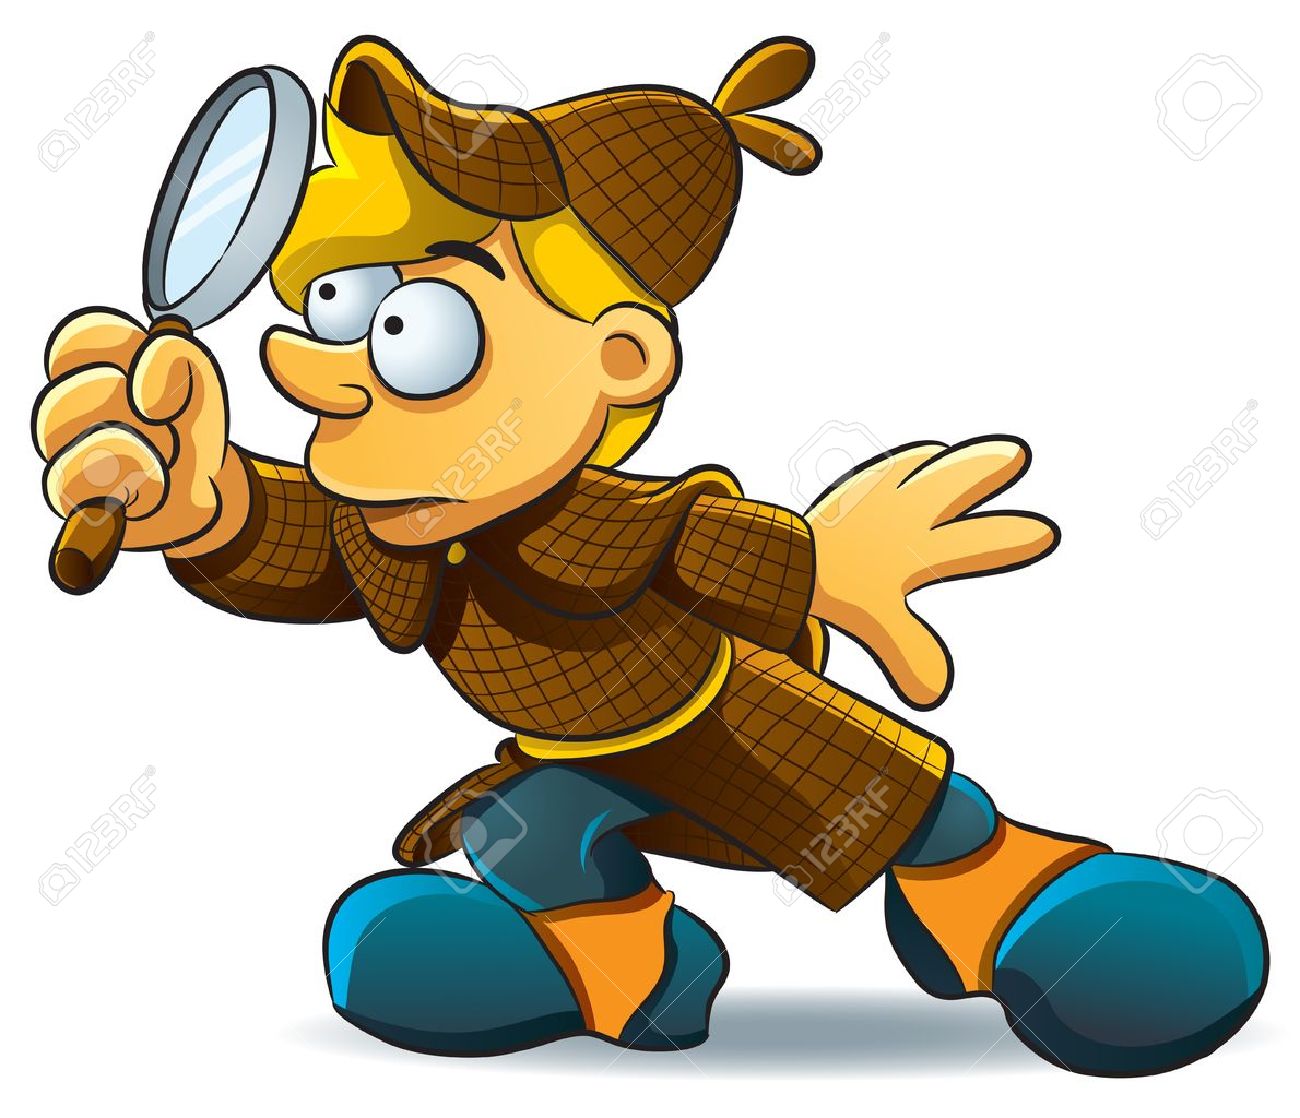 lost and found clipart investigation